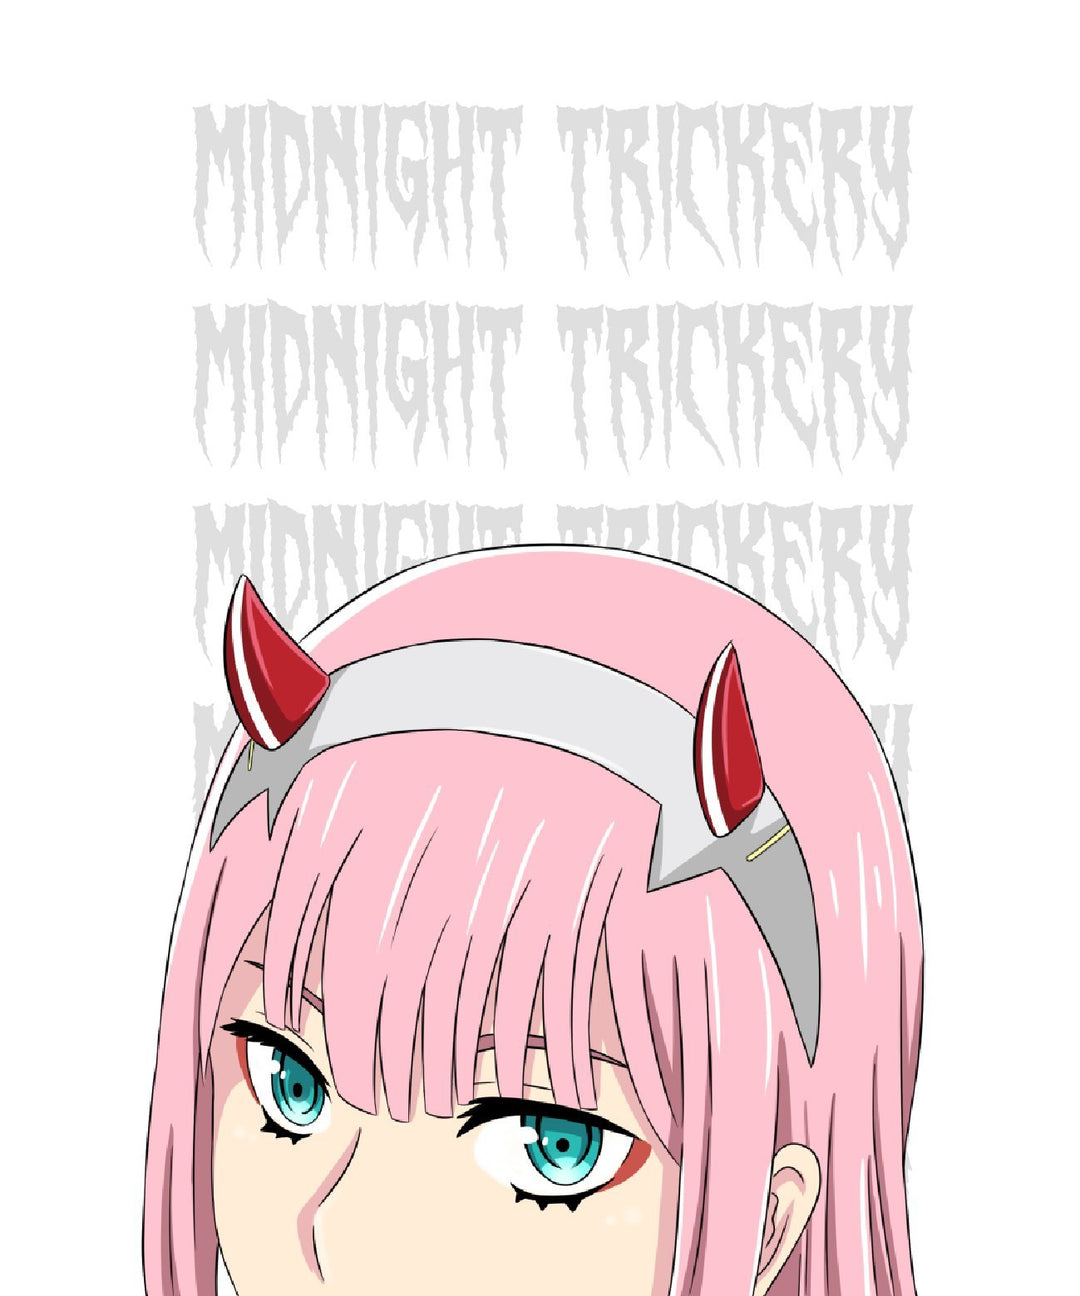 This is an image of a sticker featuring anime character Zero-Two.